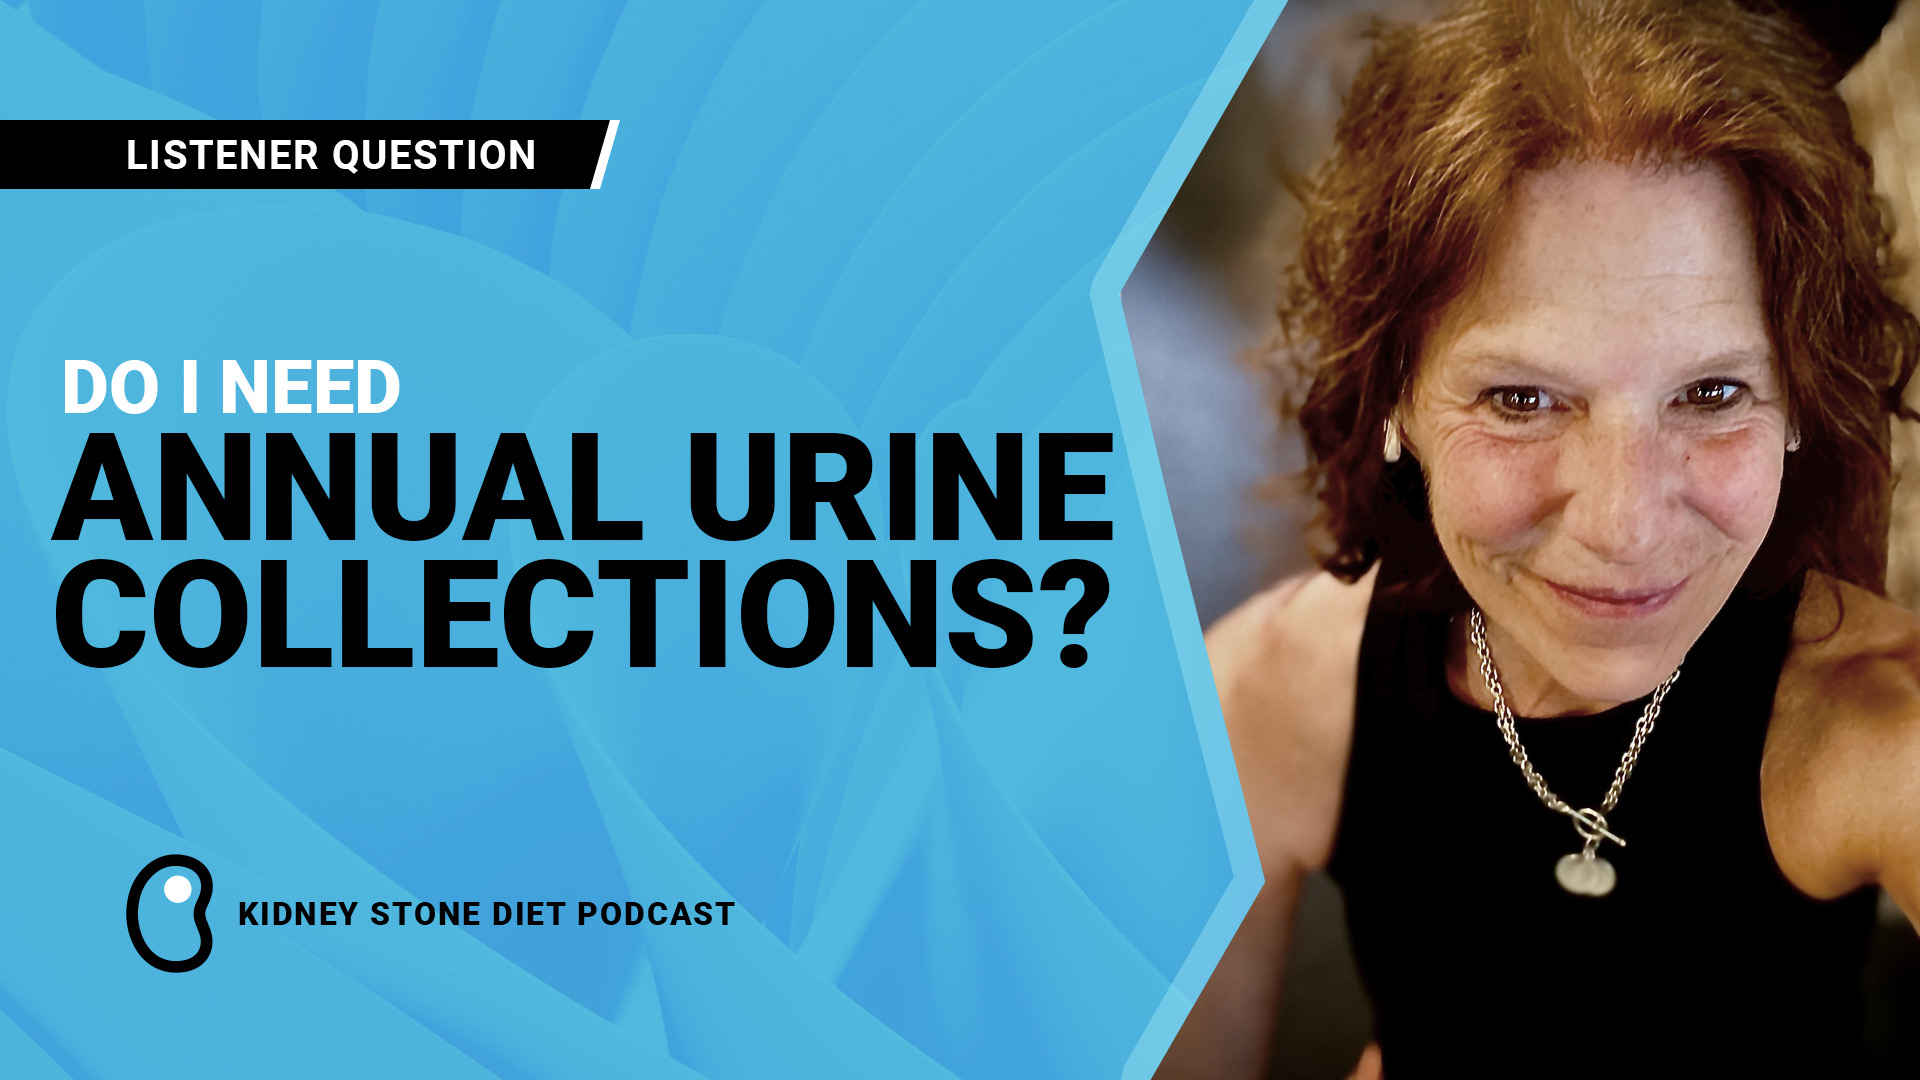 Do I need annual urine collections?